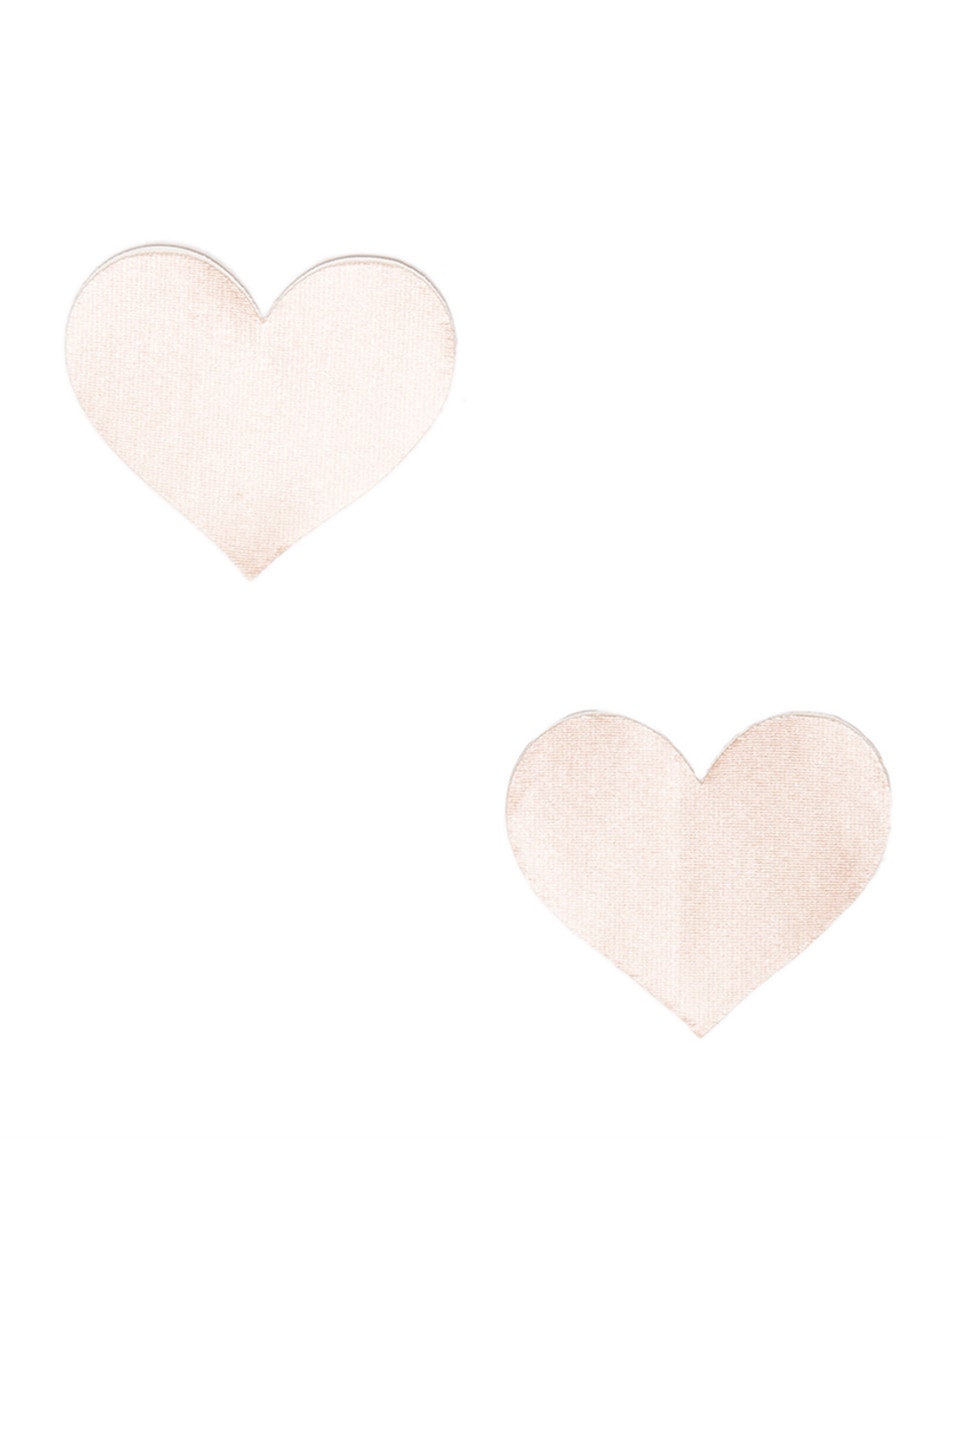 Shop Bristols6 Nippies Hearts Patch Of Freedom In Creme